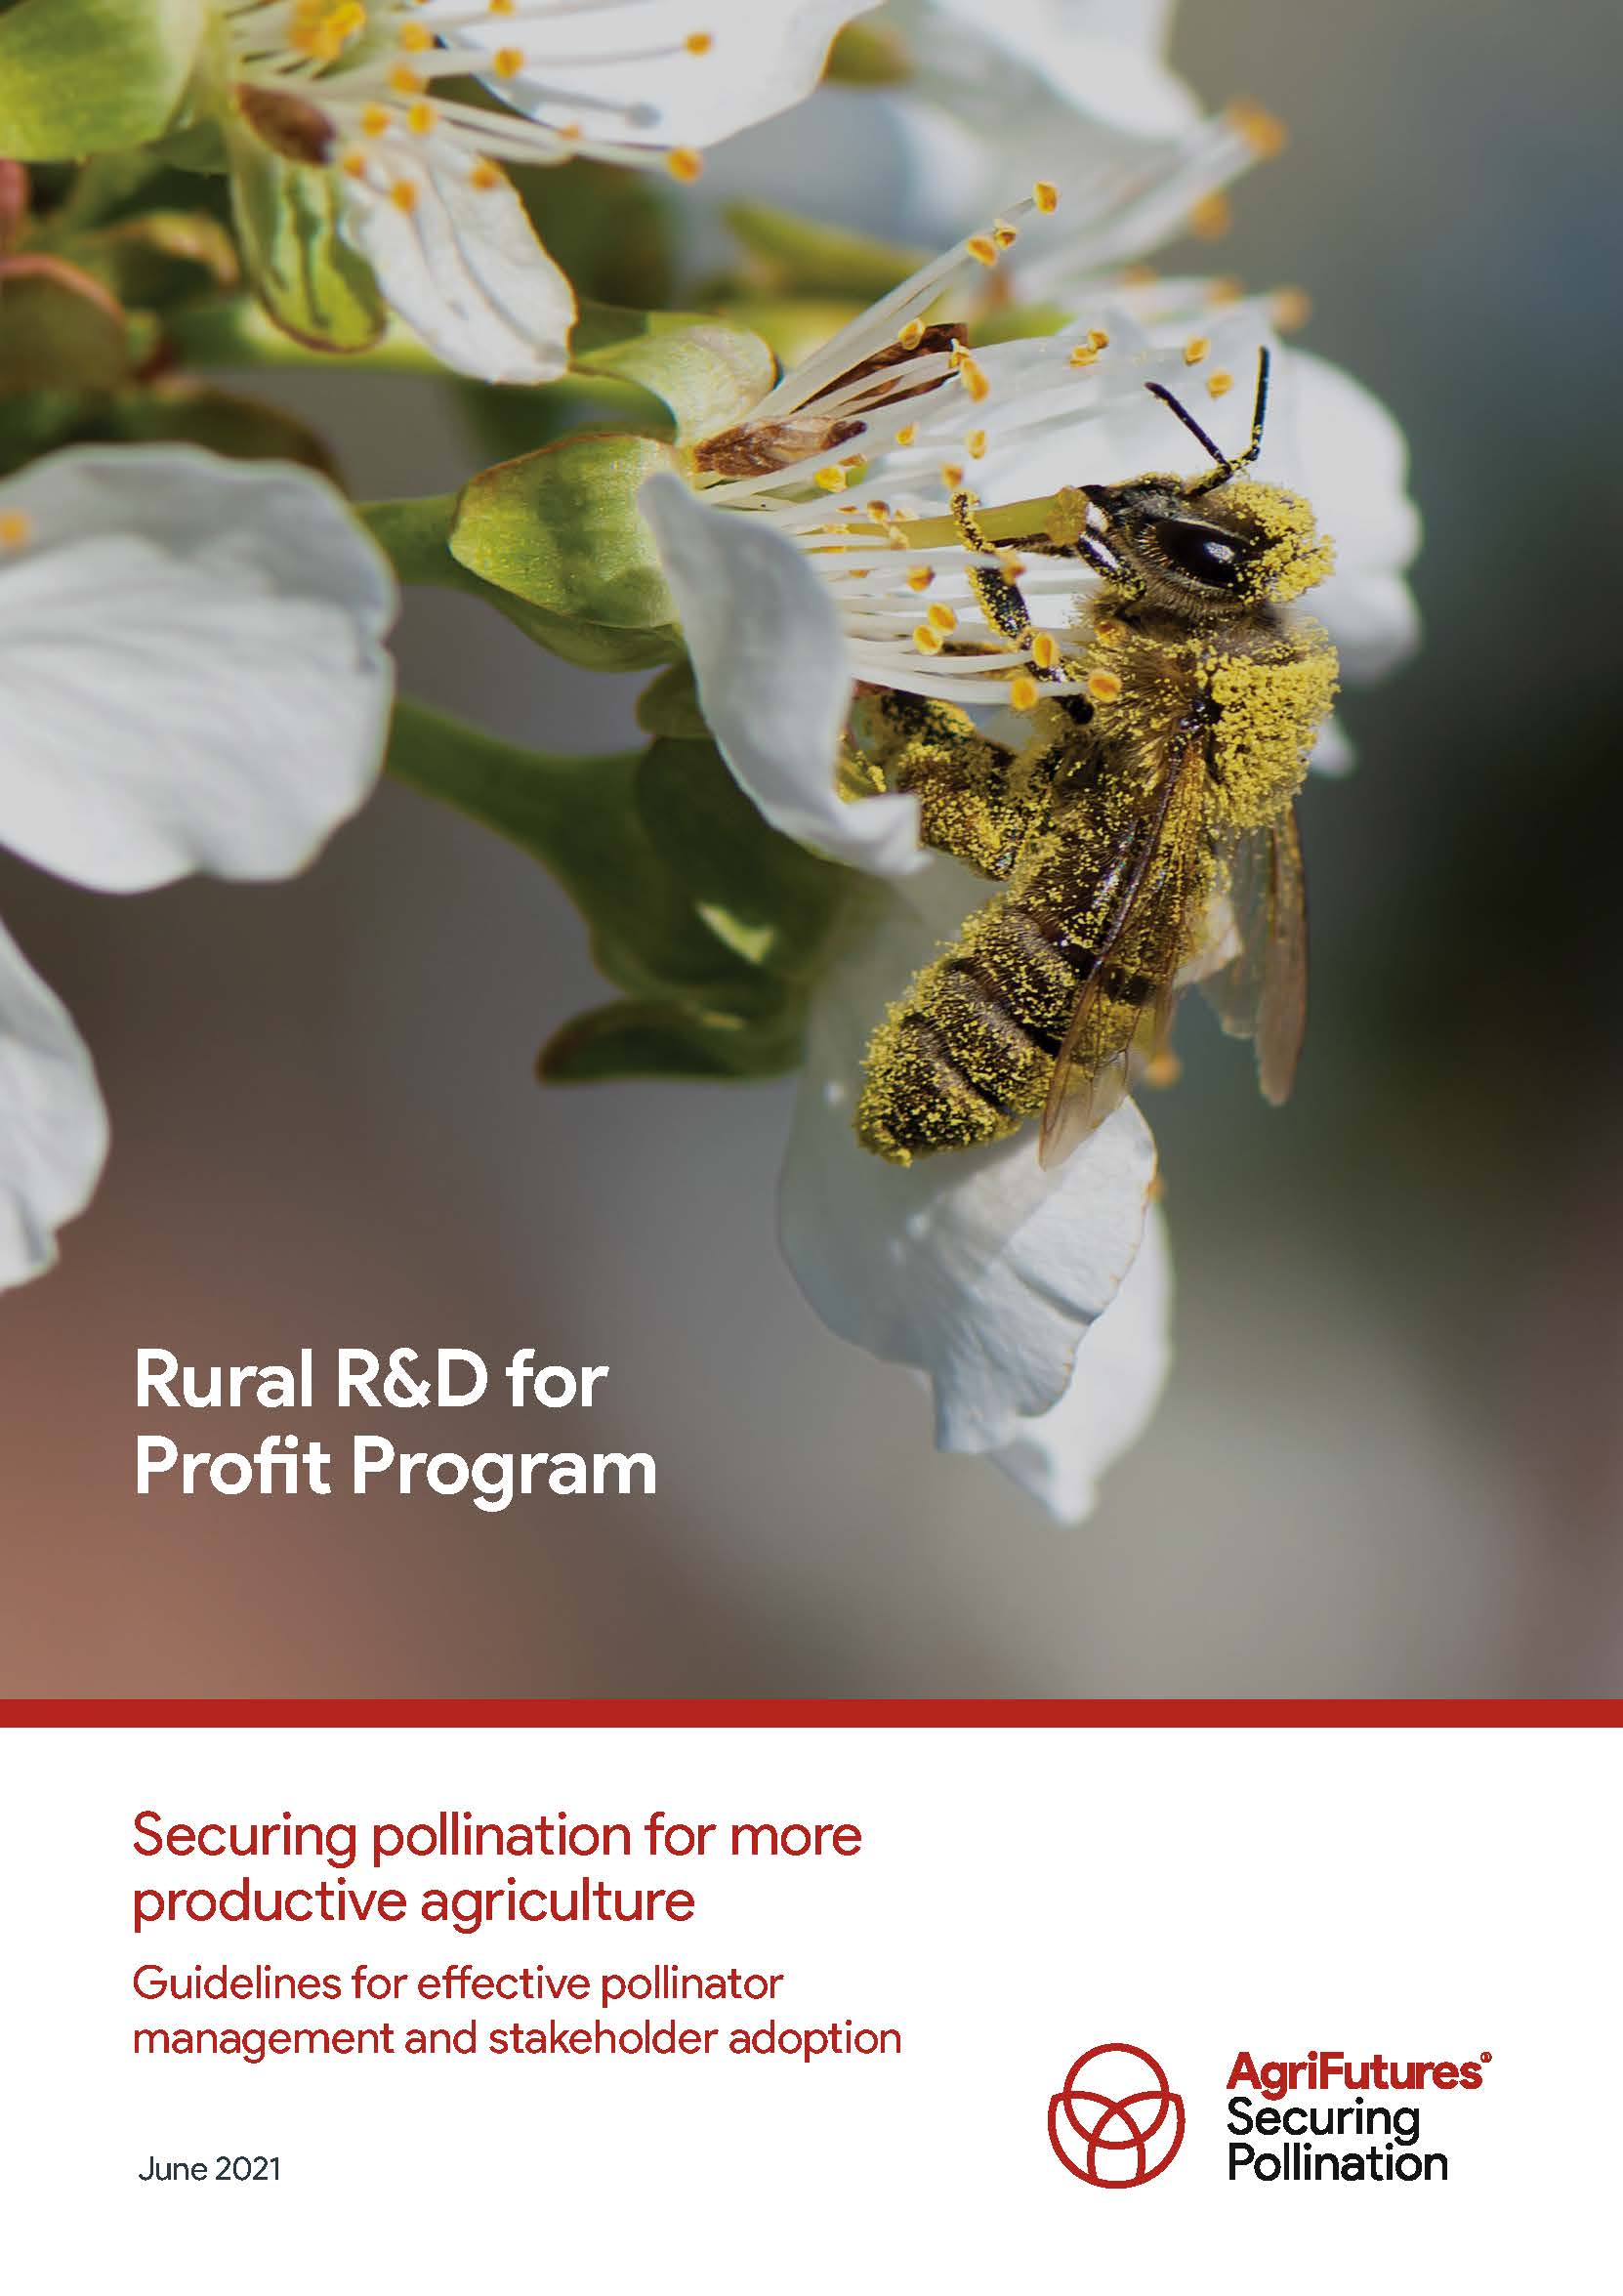 Securing pollination for more productive agriculture: Guidelines for effective pollinator management and stakeholder adoption - image